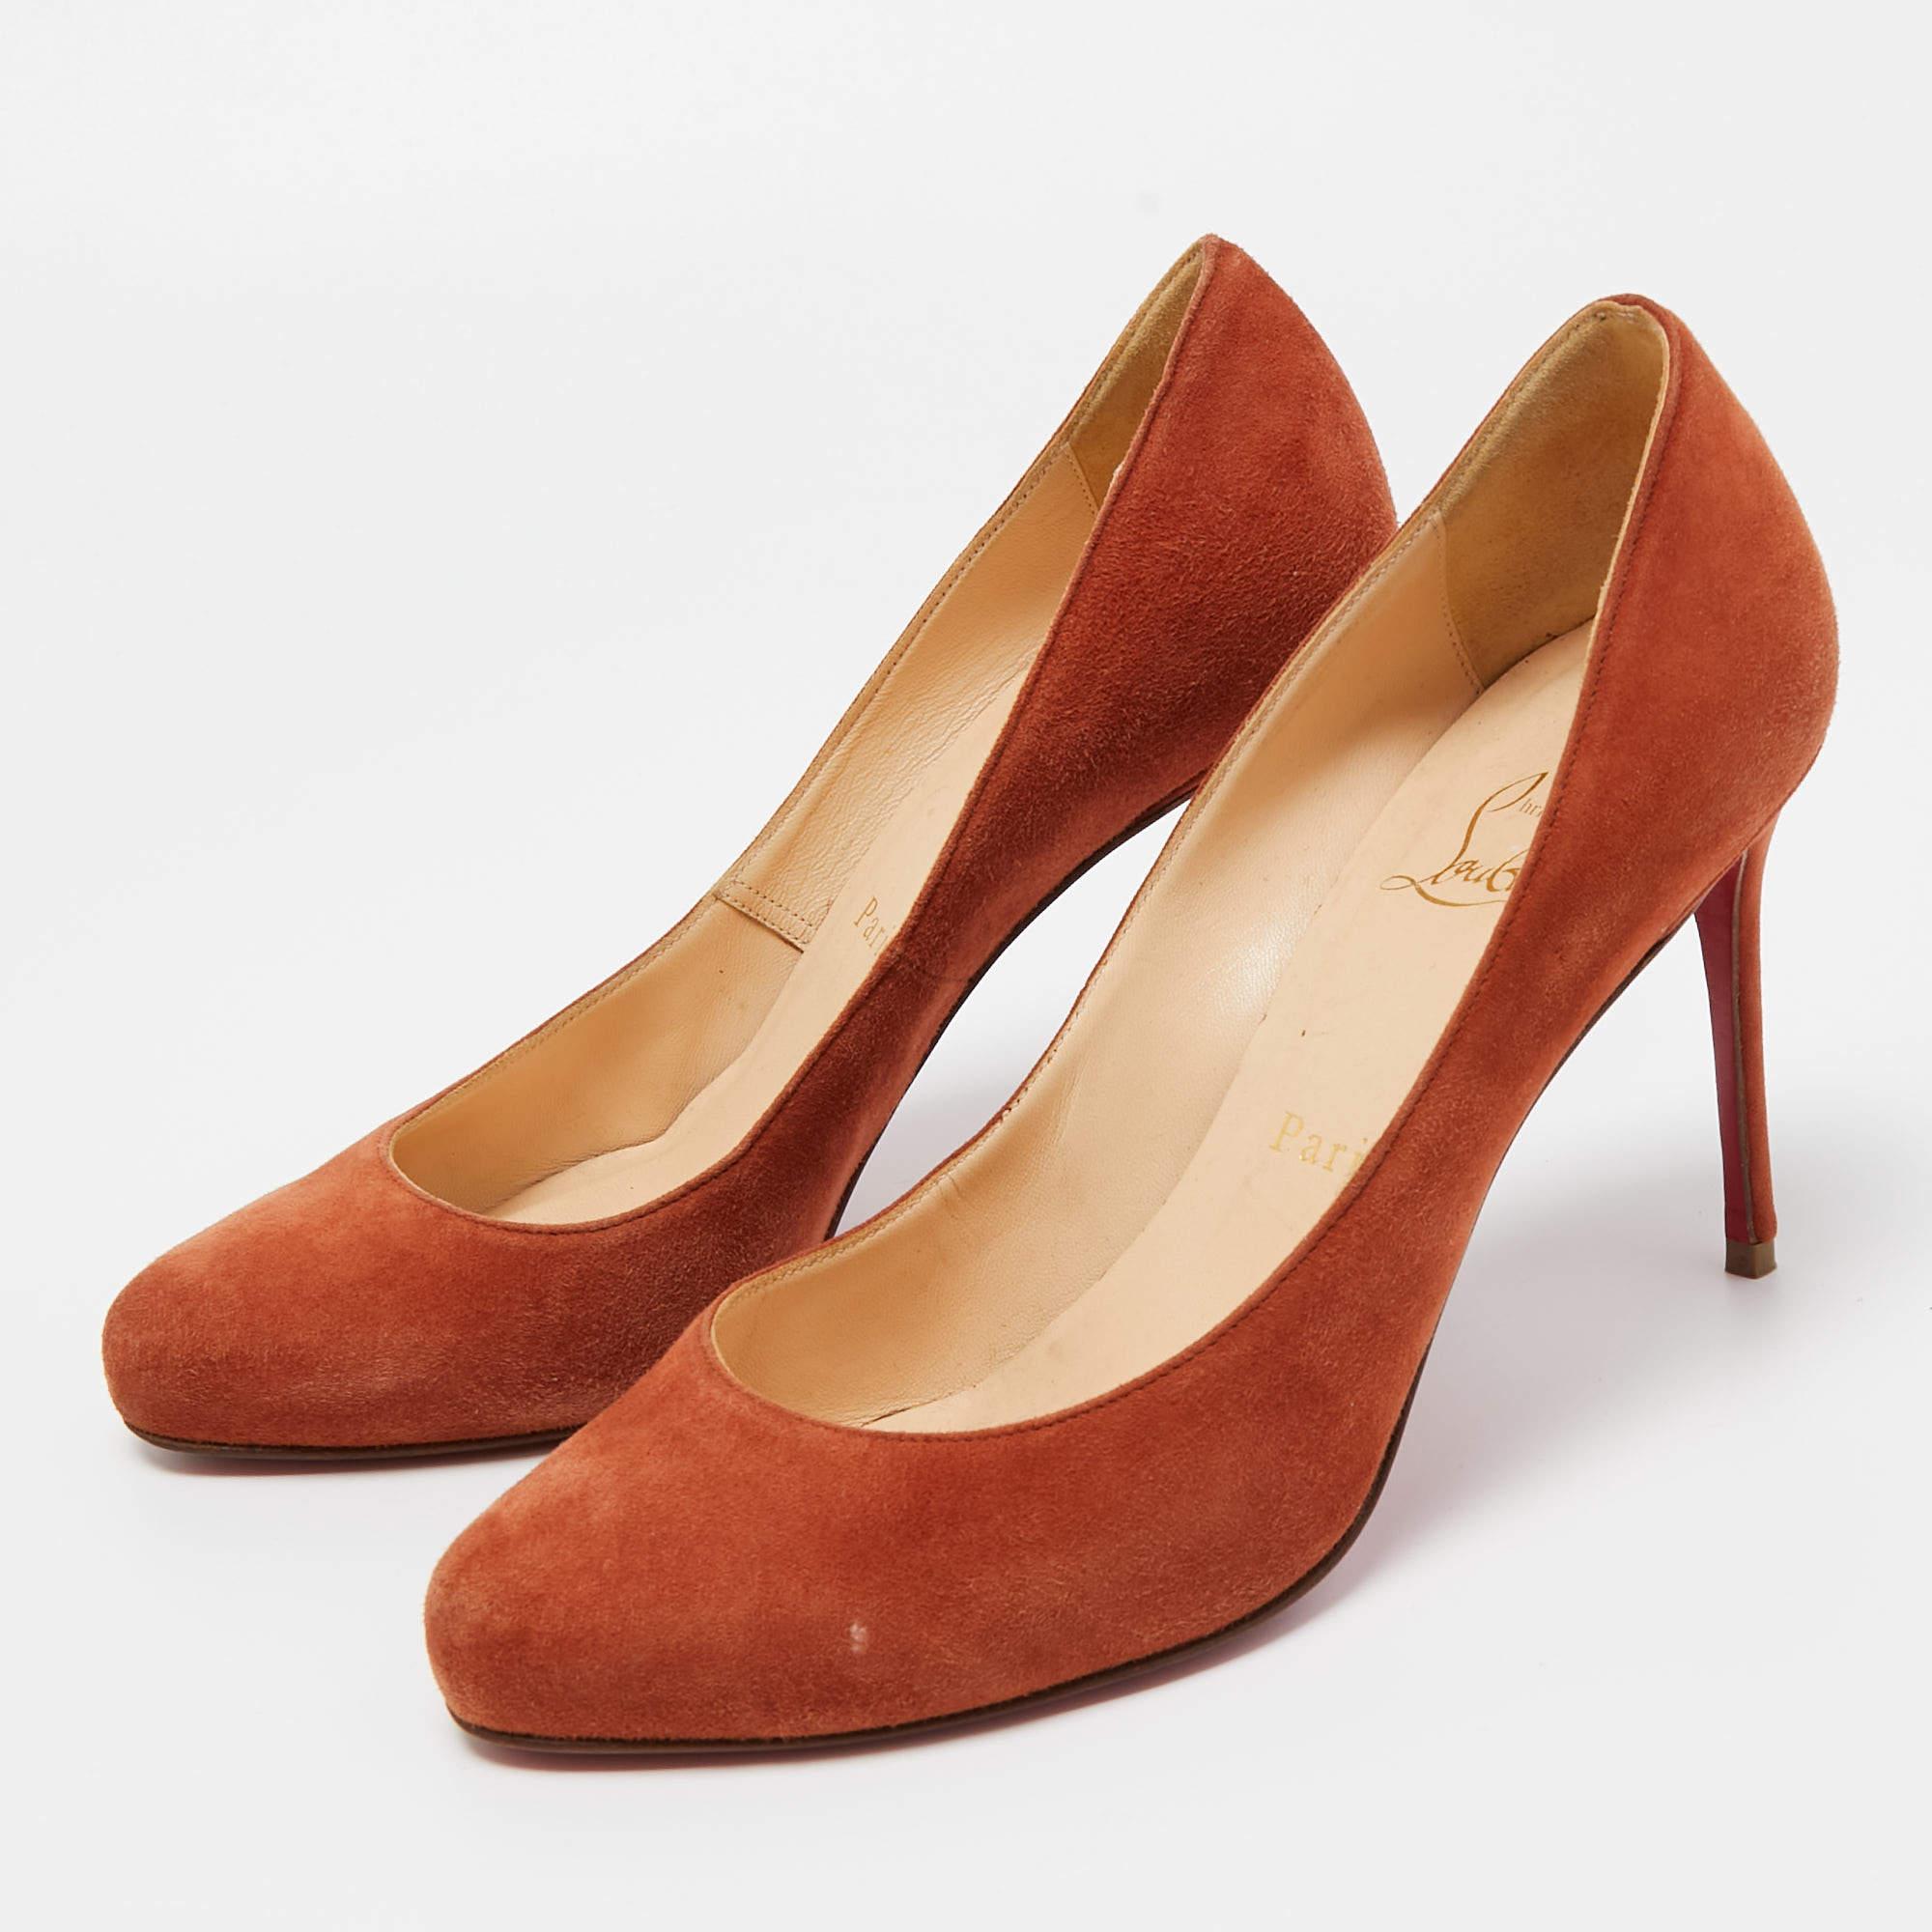 Make a statement with these designer pumps for women. Impeccably crafted, these chic heels offer both fashion and comfort, elevating your look with each graceful step.

